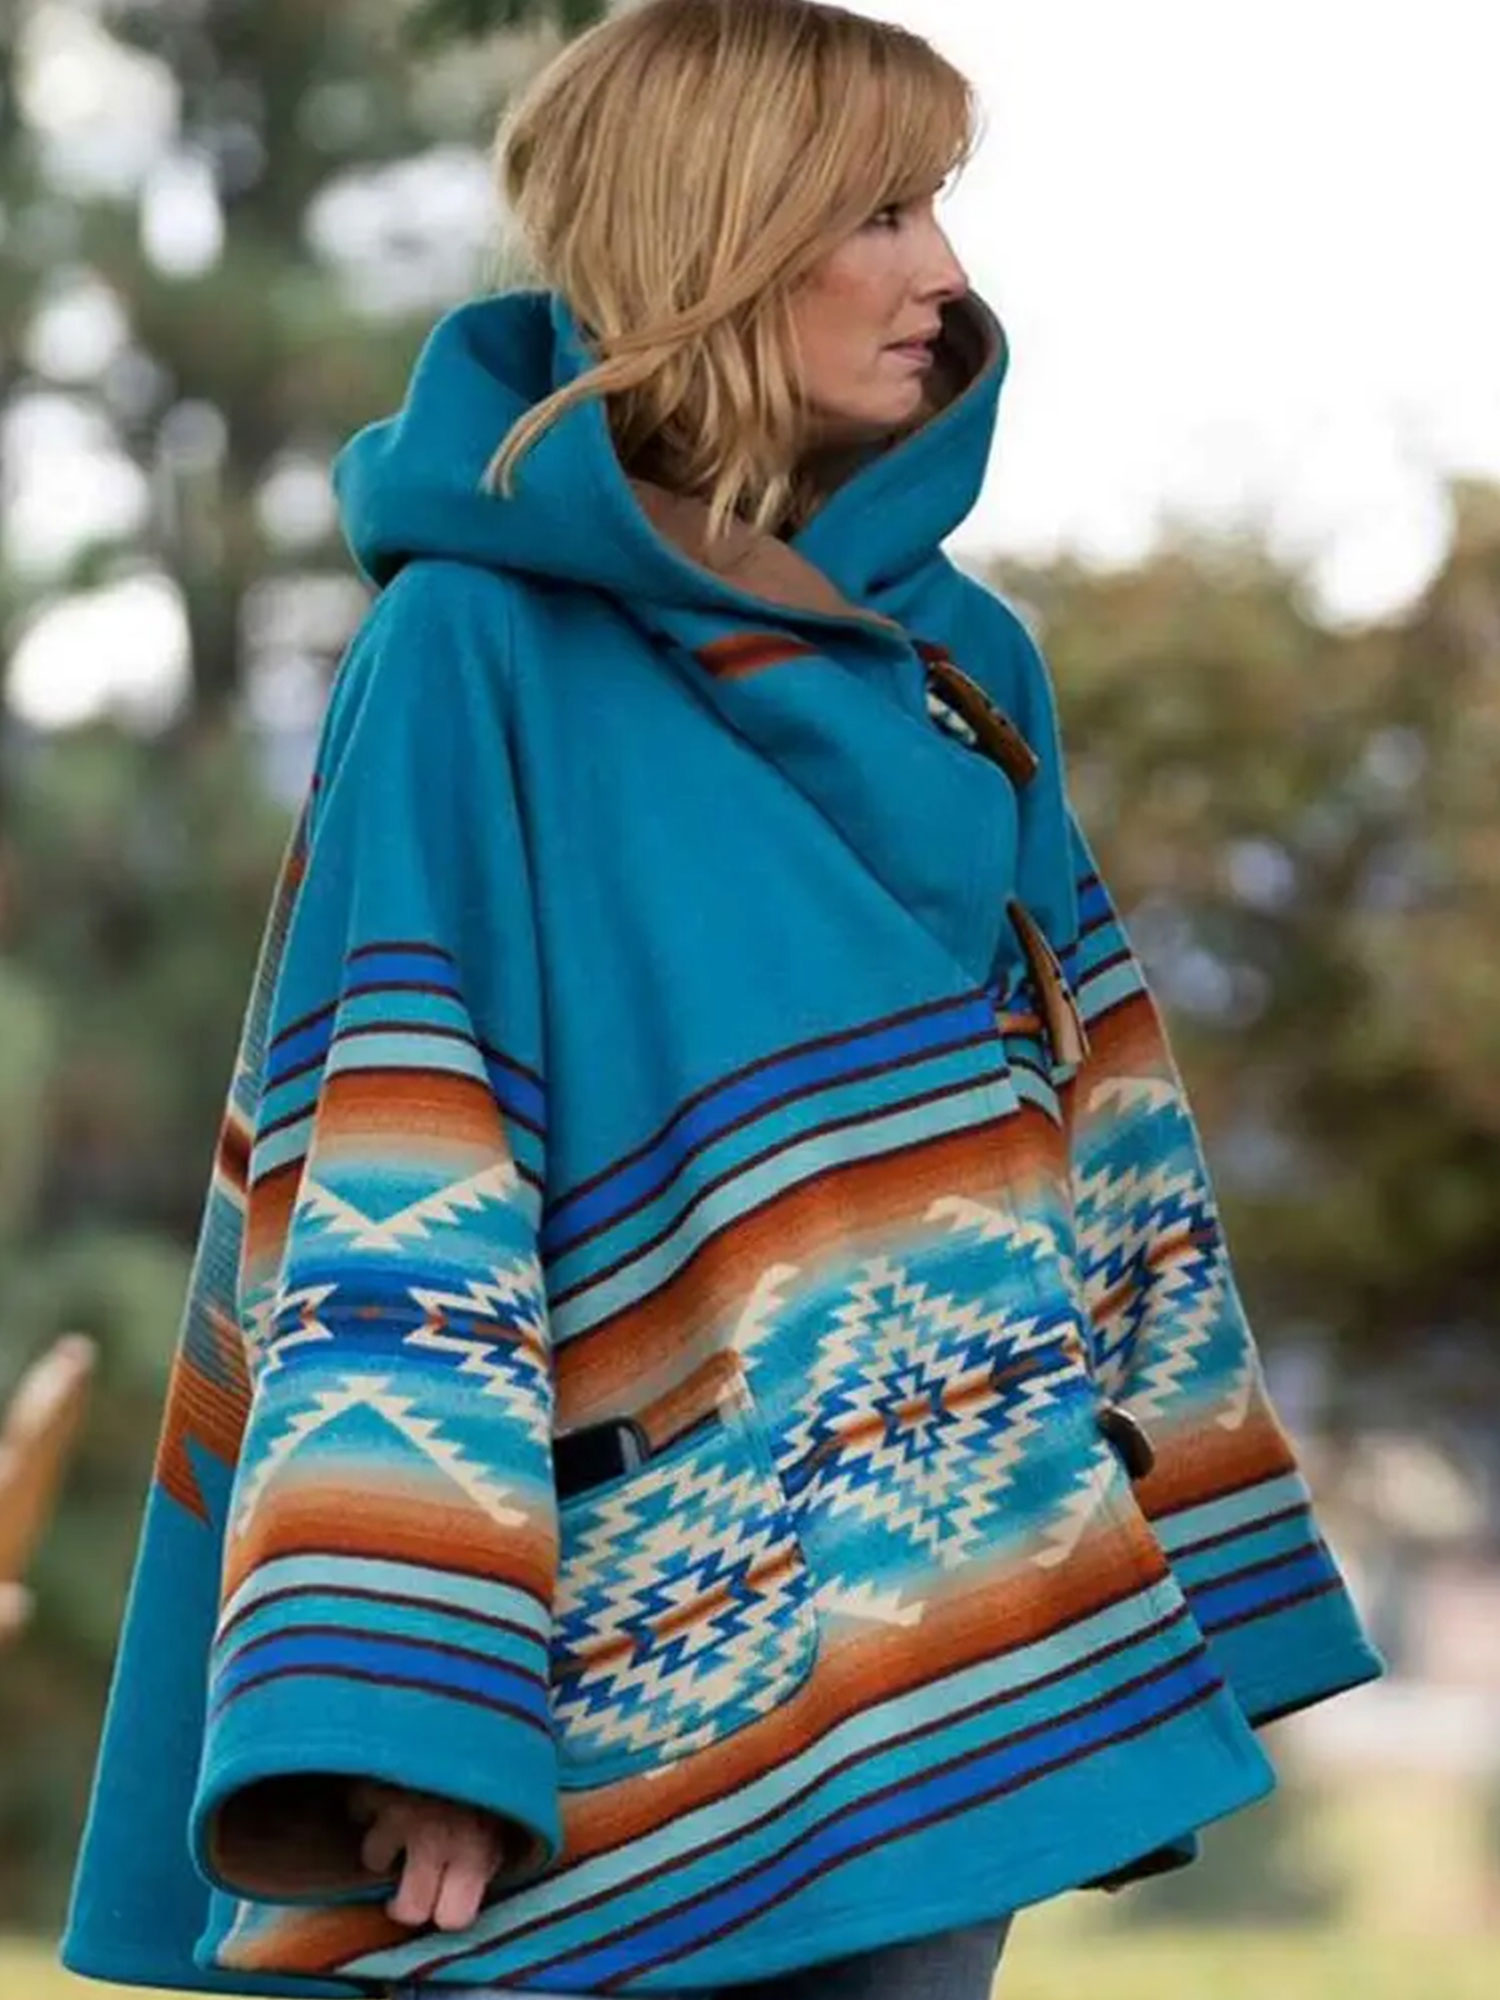 blue-hooded-toggle-coat-inspired-by-kelly-reillys-yellowstone-beth-dutton (1)